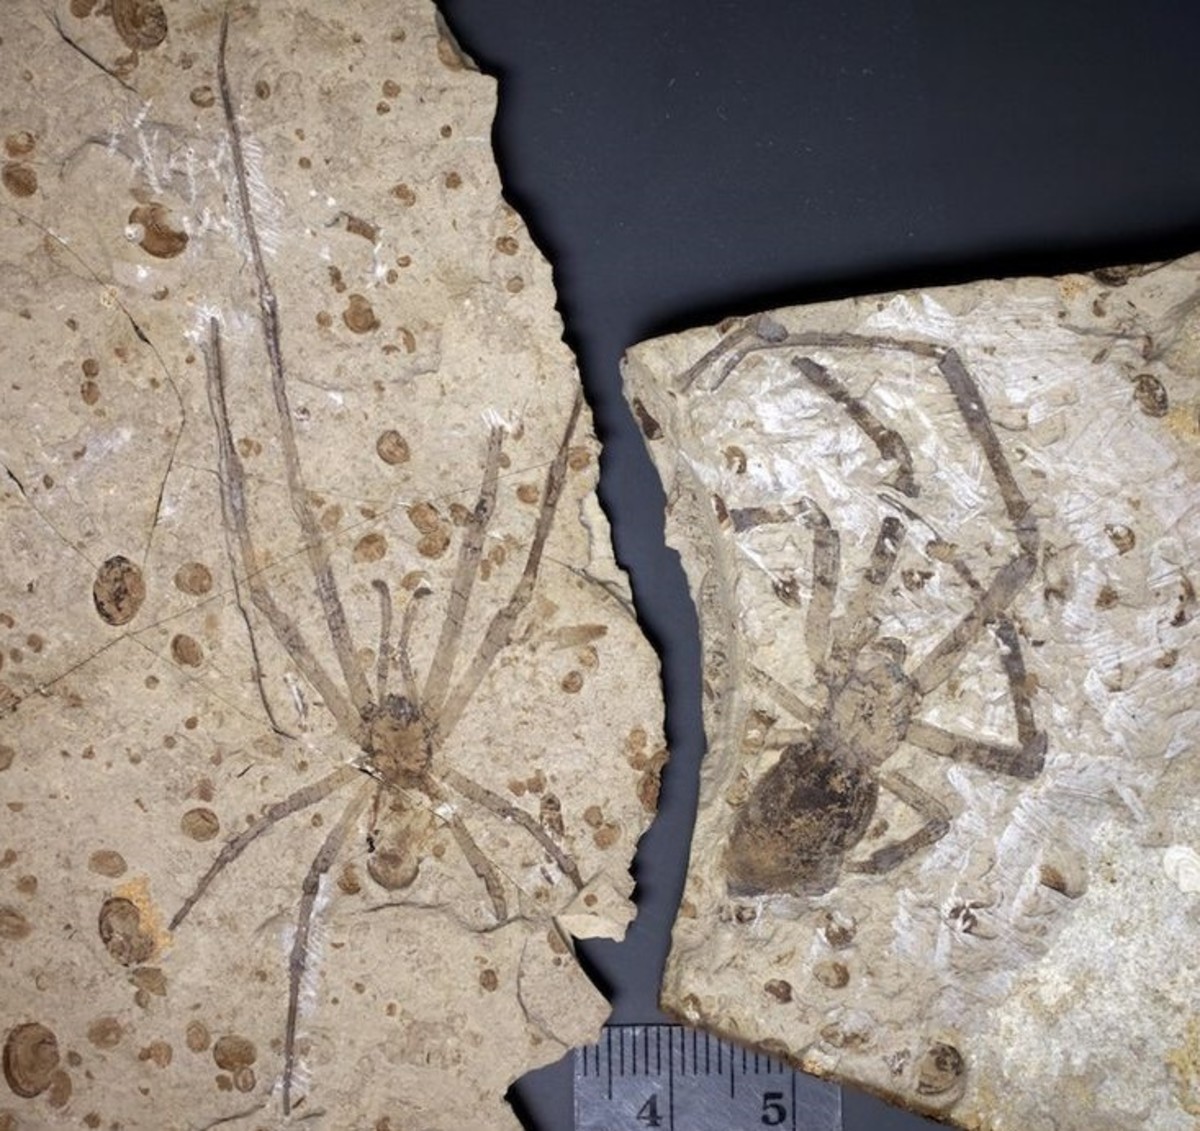 Mongolarachne was one of the earliest Orb-weaver spiders, 165 million years ago.